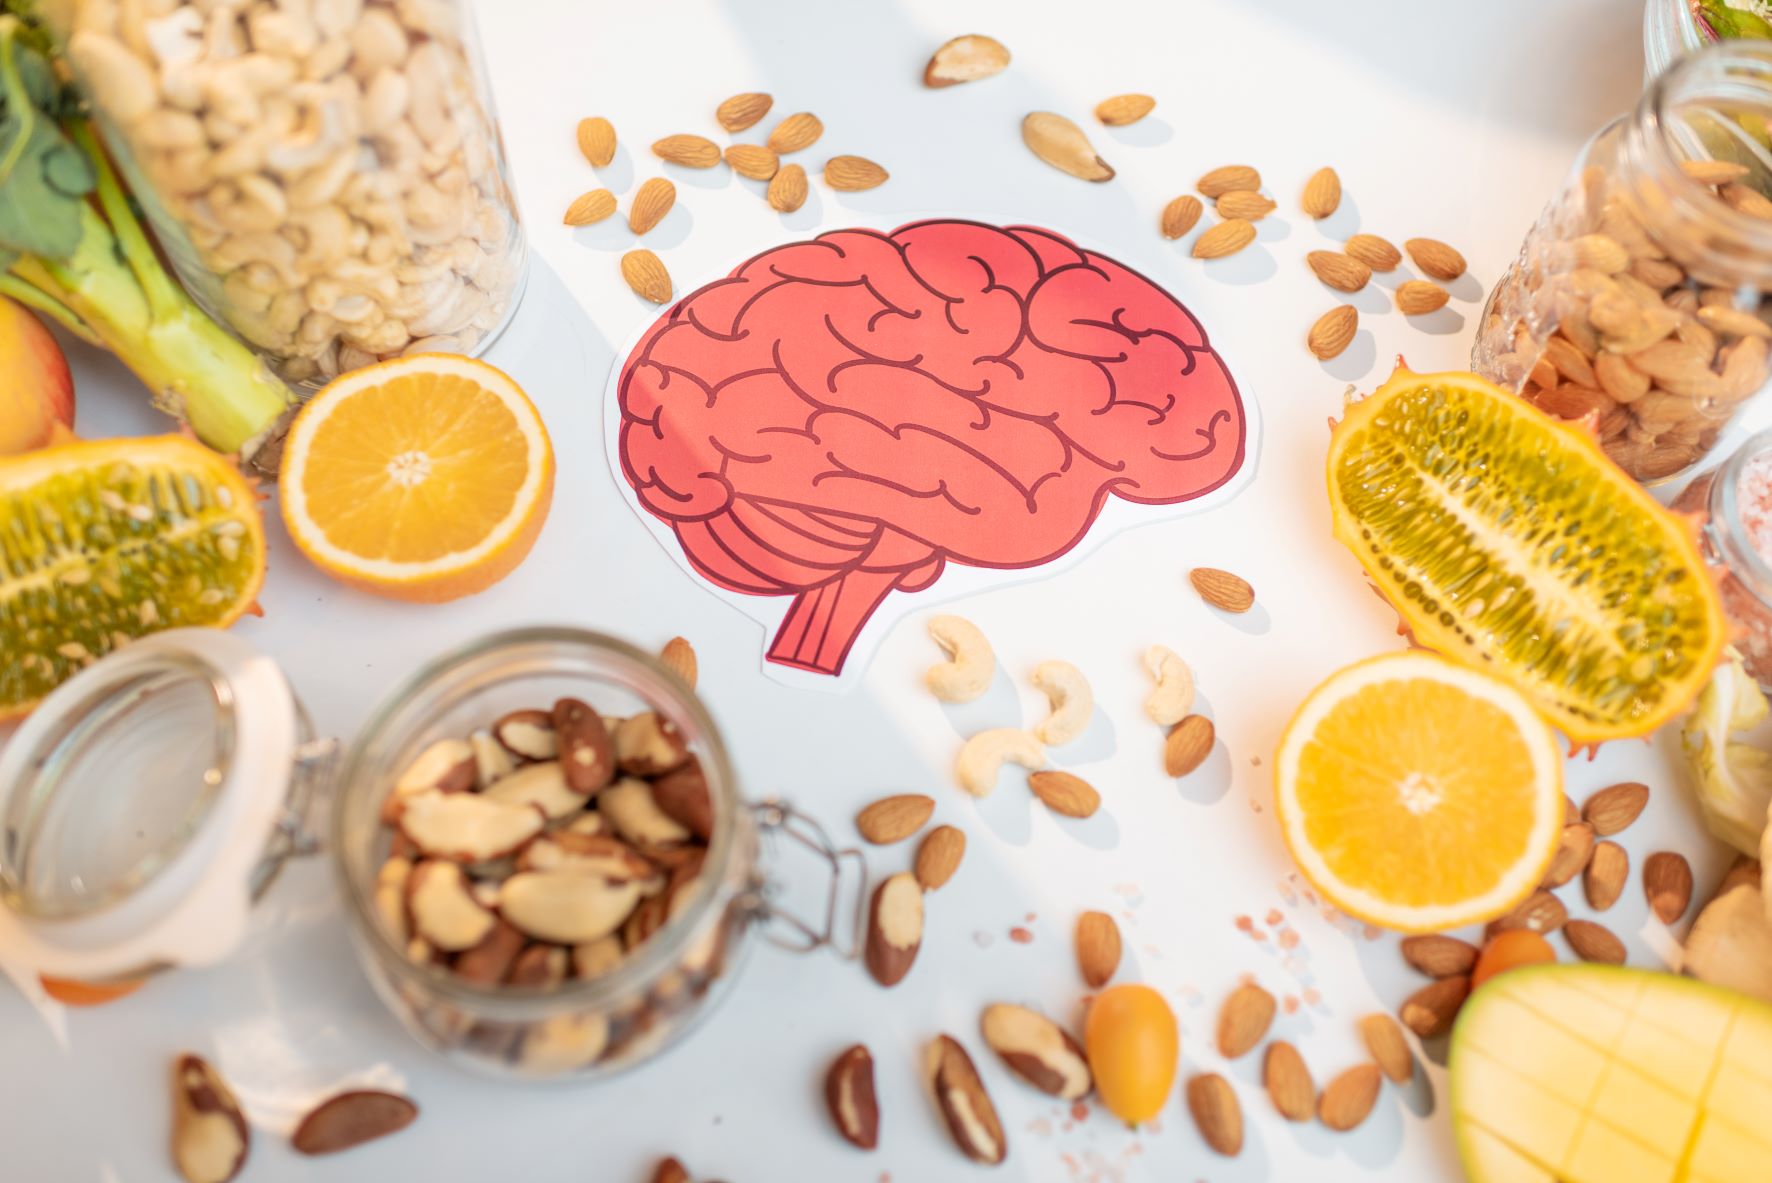 What foods are best for the brain